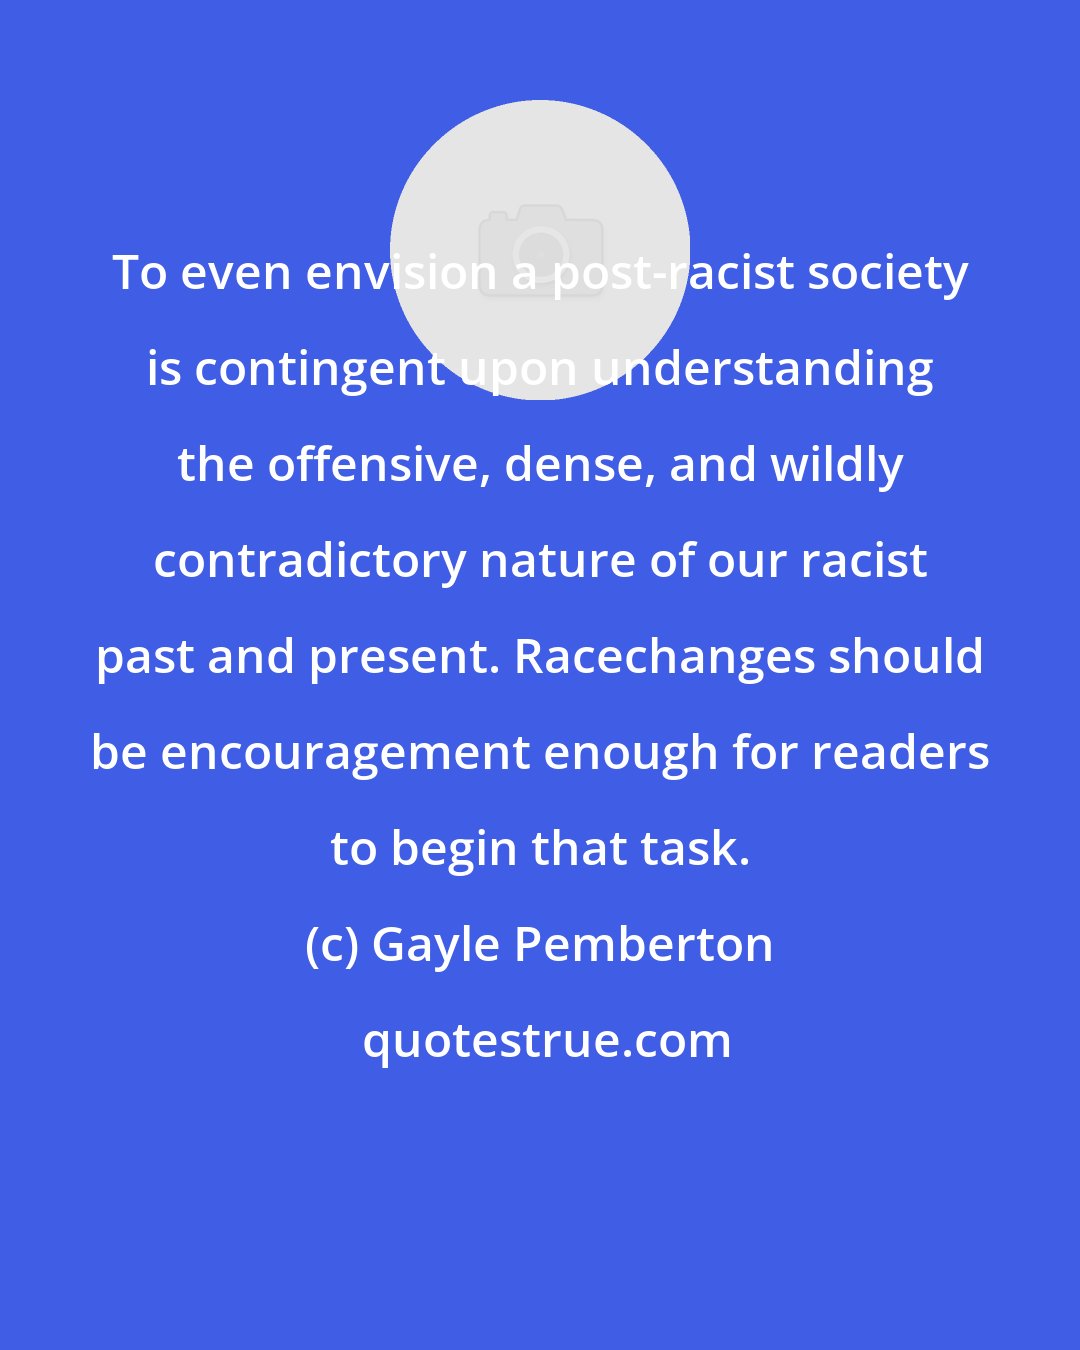 Gayle Pemberton: To even envision a post-racist society is contingent upon understanding the offensive, dense, and wildly contradictory nature of our racist past and present. Racechanges should be encouragement enough for readers to begin that task.